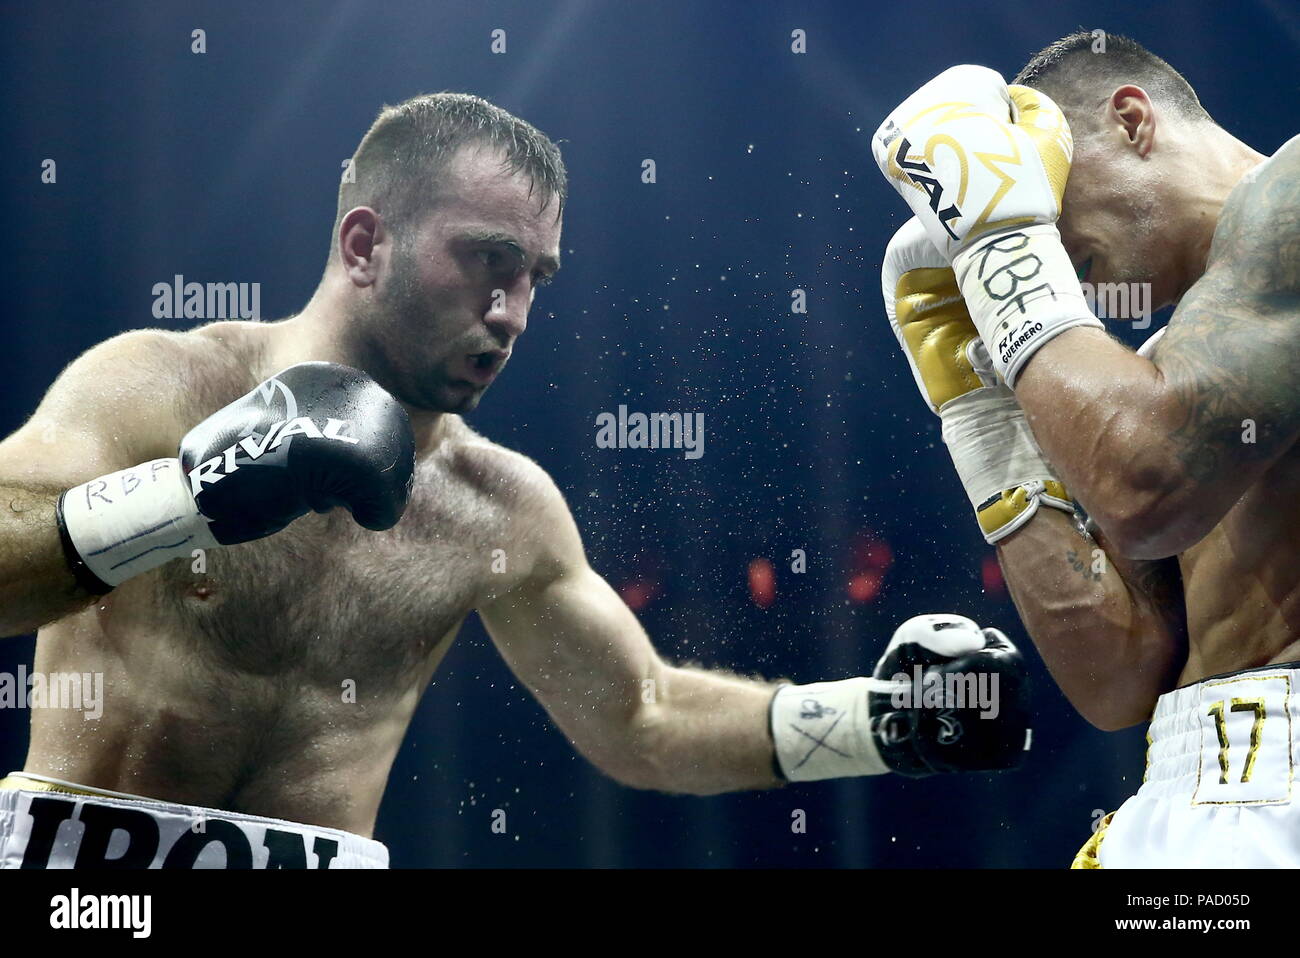 Moscow, Russia. 21st July, 2018. MOSCOW, RUSSIA - JULY 21, 2018: WBA/IBF  champion Murat Gassiev (L) of Russia, and WBC/WBO champion Oleksandr Usyk  of Ukraine, in their WBSS (World Boxing Super Series)